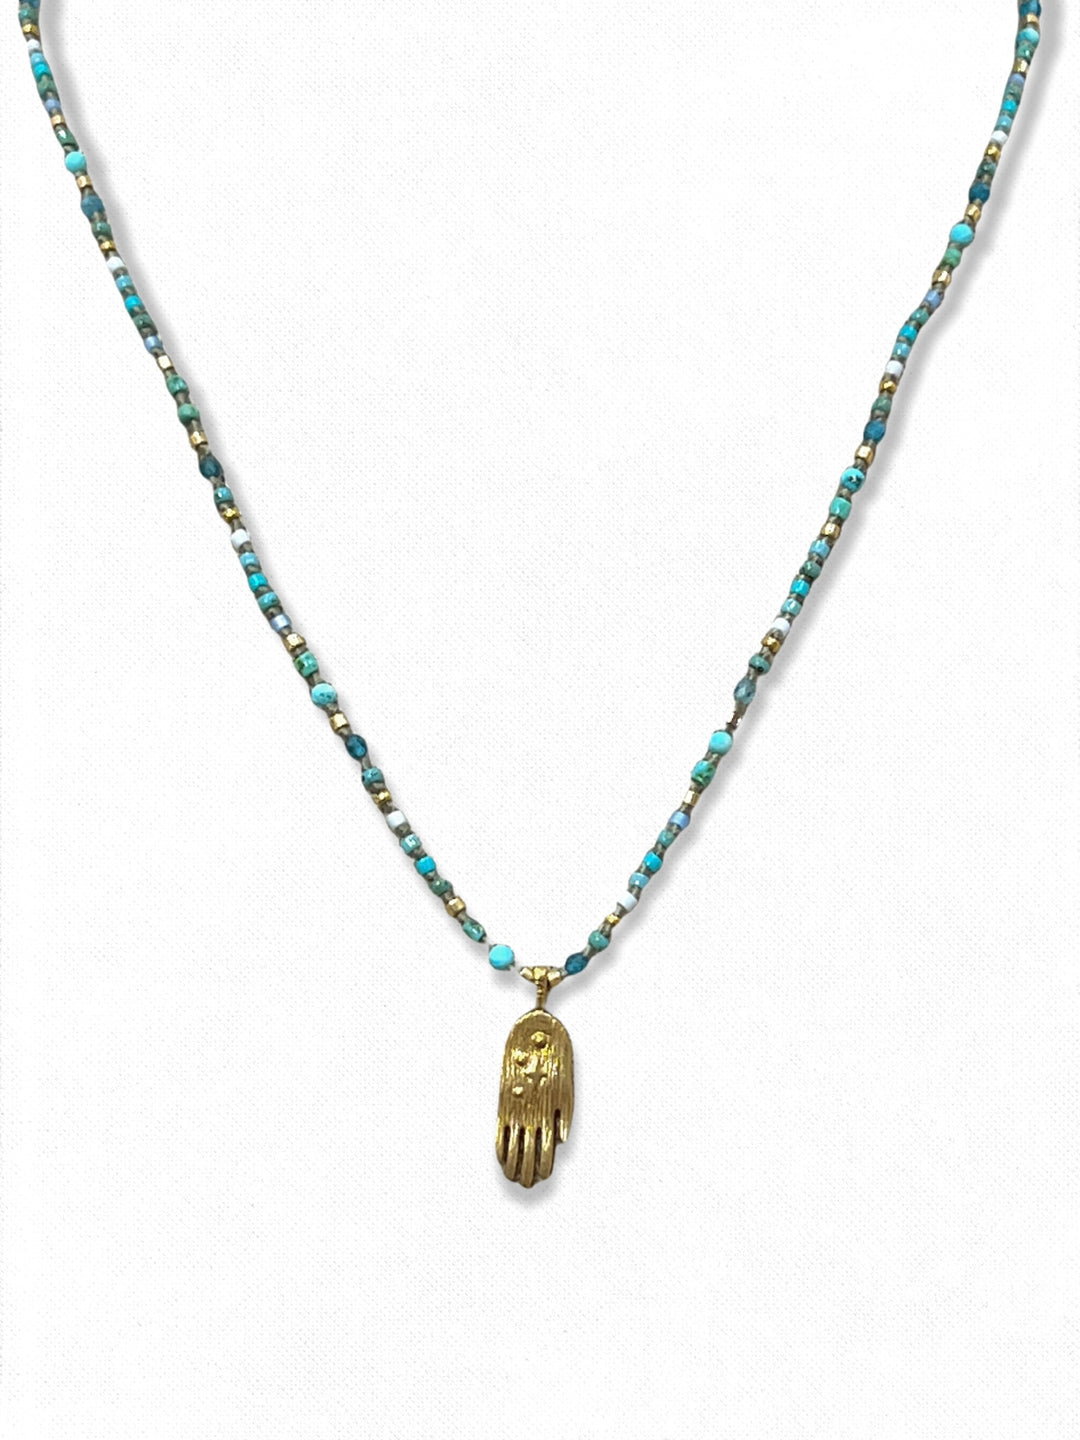 TINY PENDANT BEADED NECKLACE - Kingfisher Road - Online Boutique